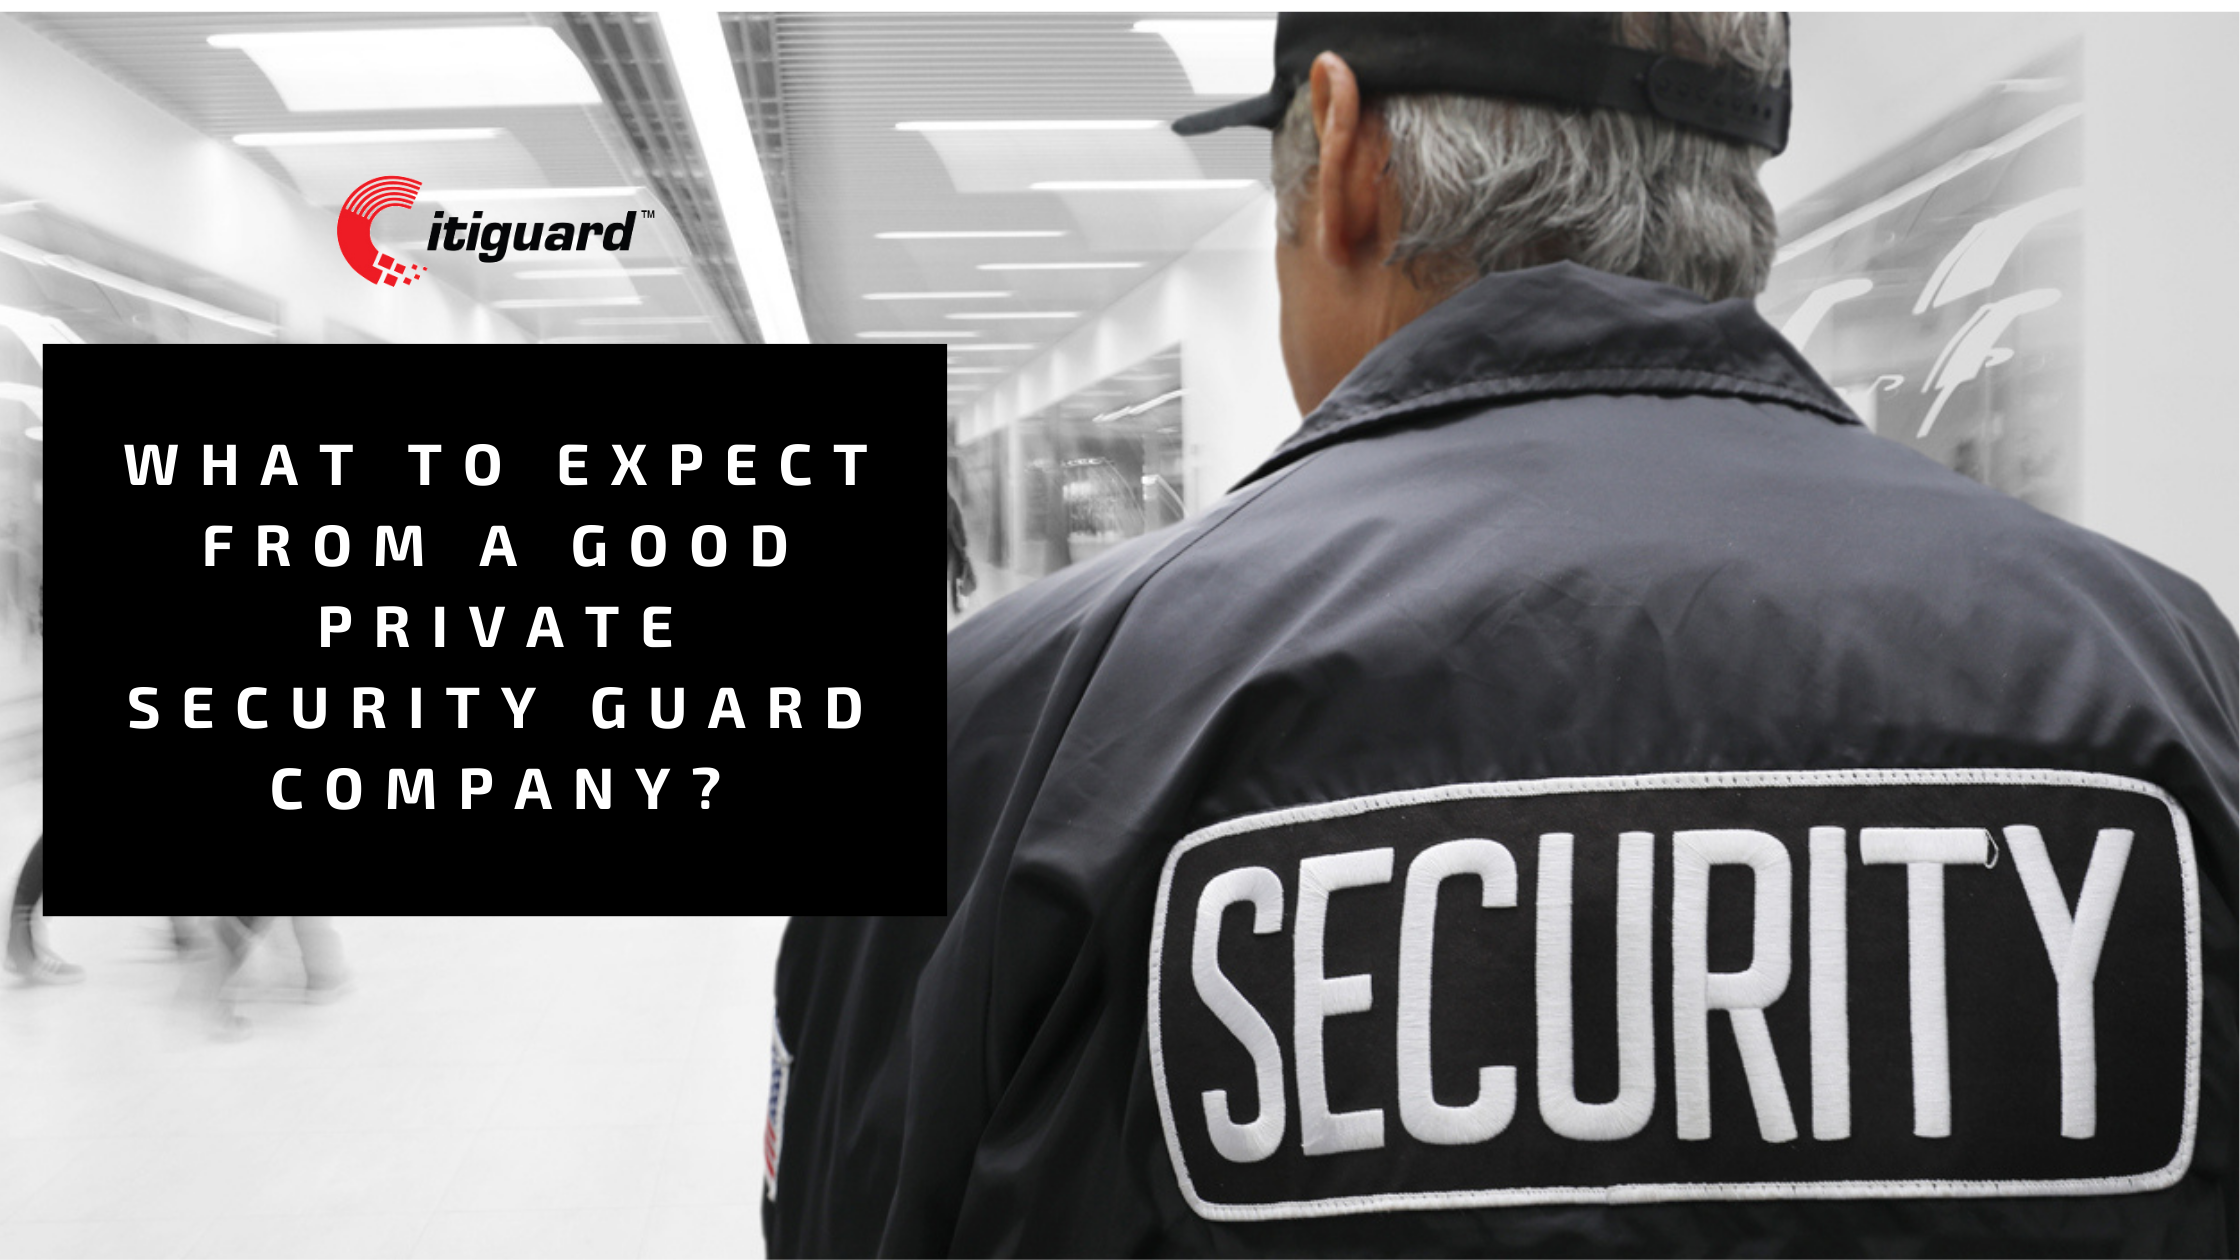 What to Expect from a Good Private Security Guard Company?